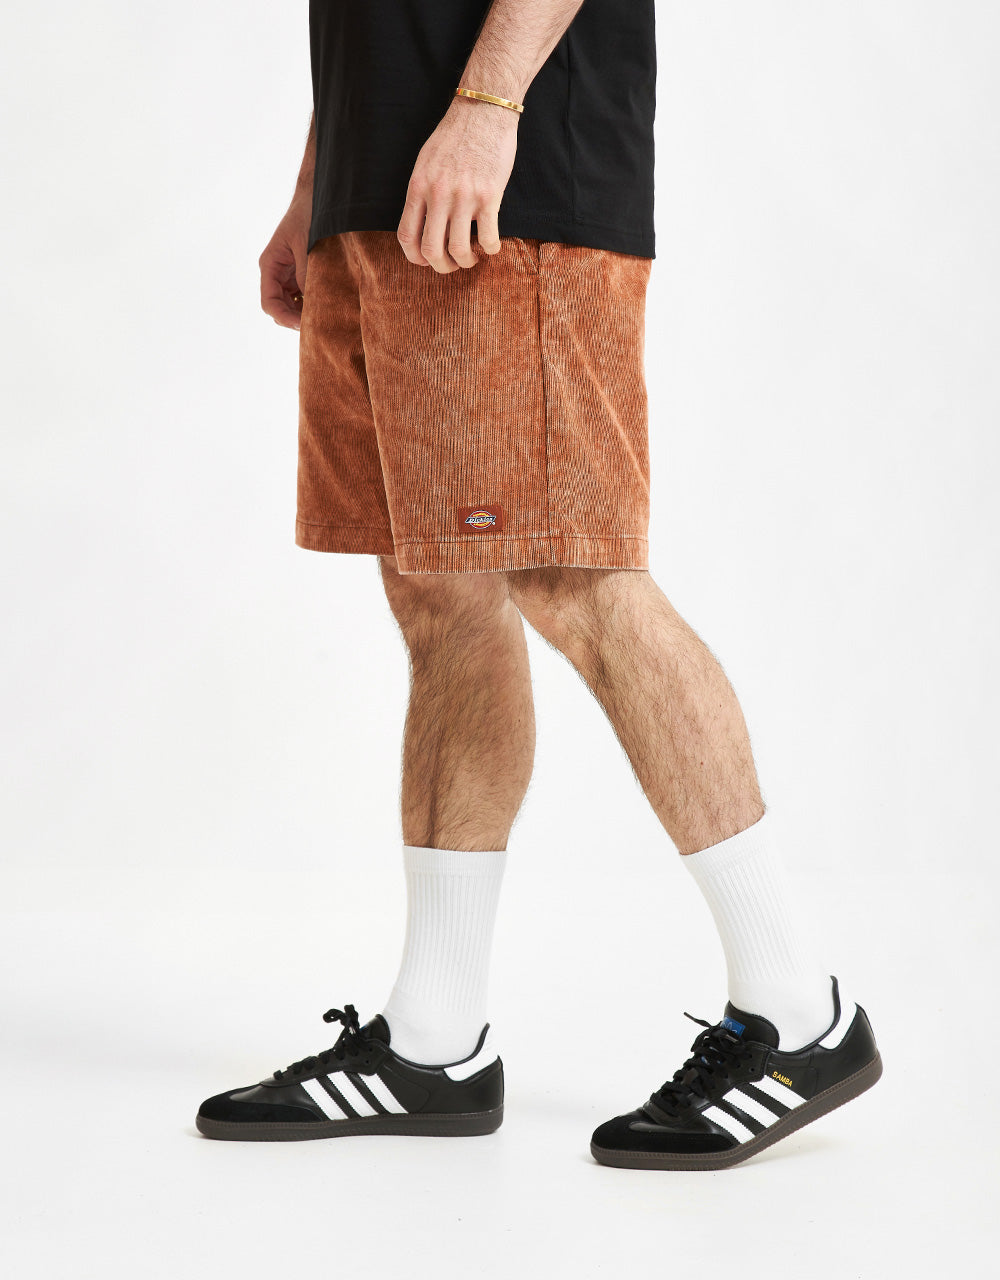 Dickies Chase City Short - Mocha Bisque